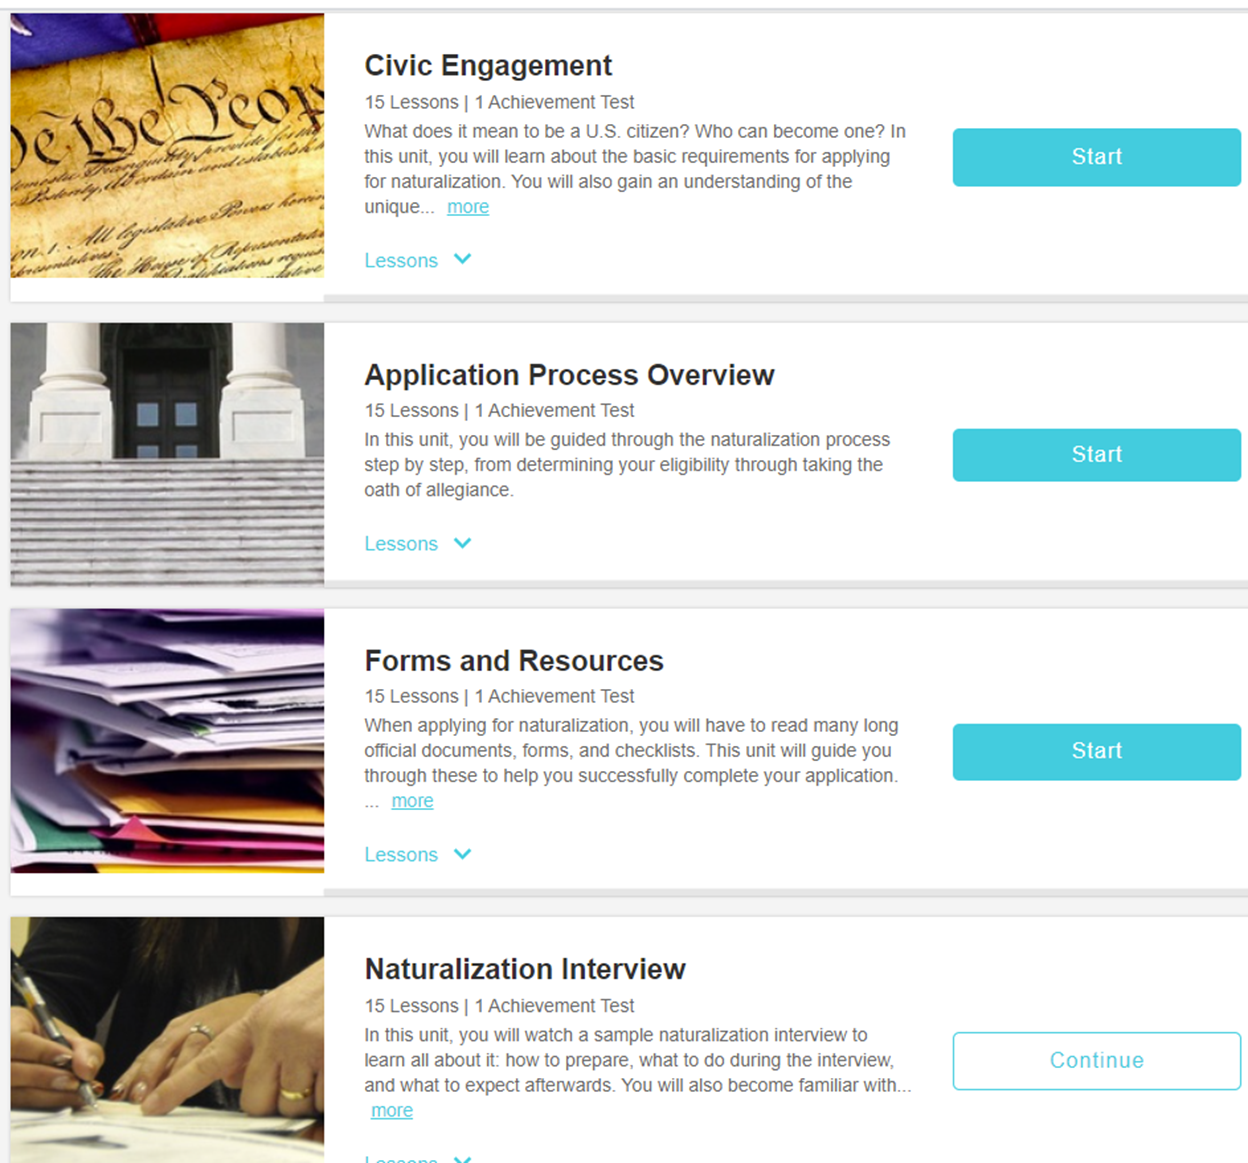 Screenshot: Voxy EnGen Citizenship Course has 4 modules: Civic Engagement, Application Process, Forms, and Naturalization Interview